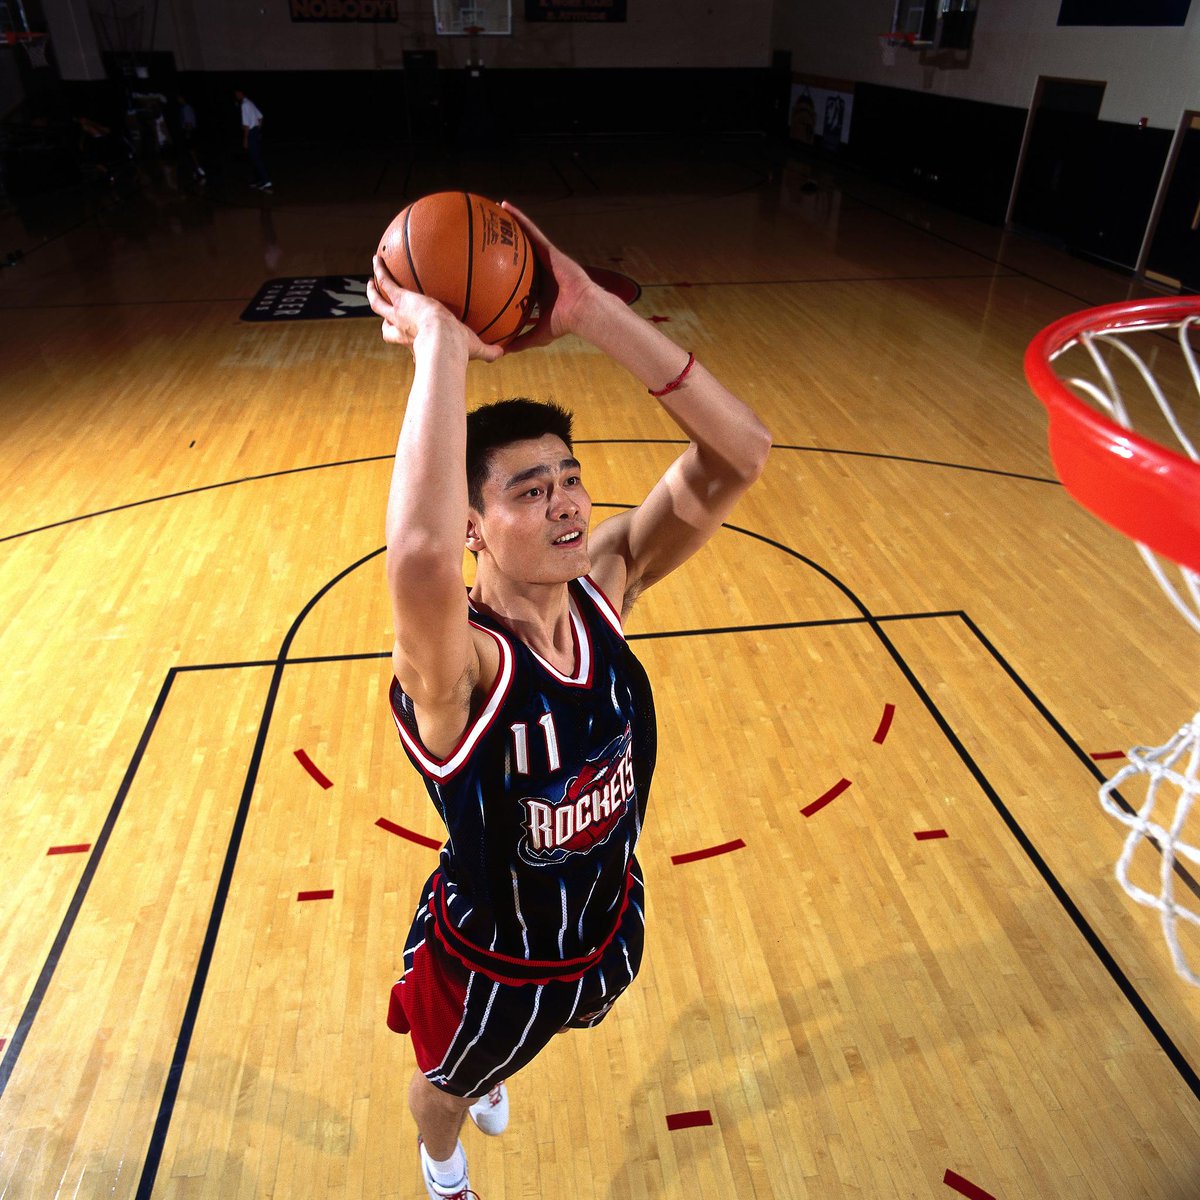 The Complete History of Asian Players in the NBA